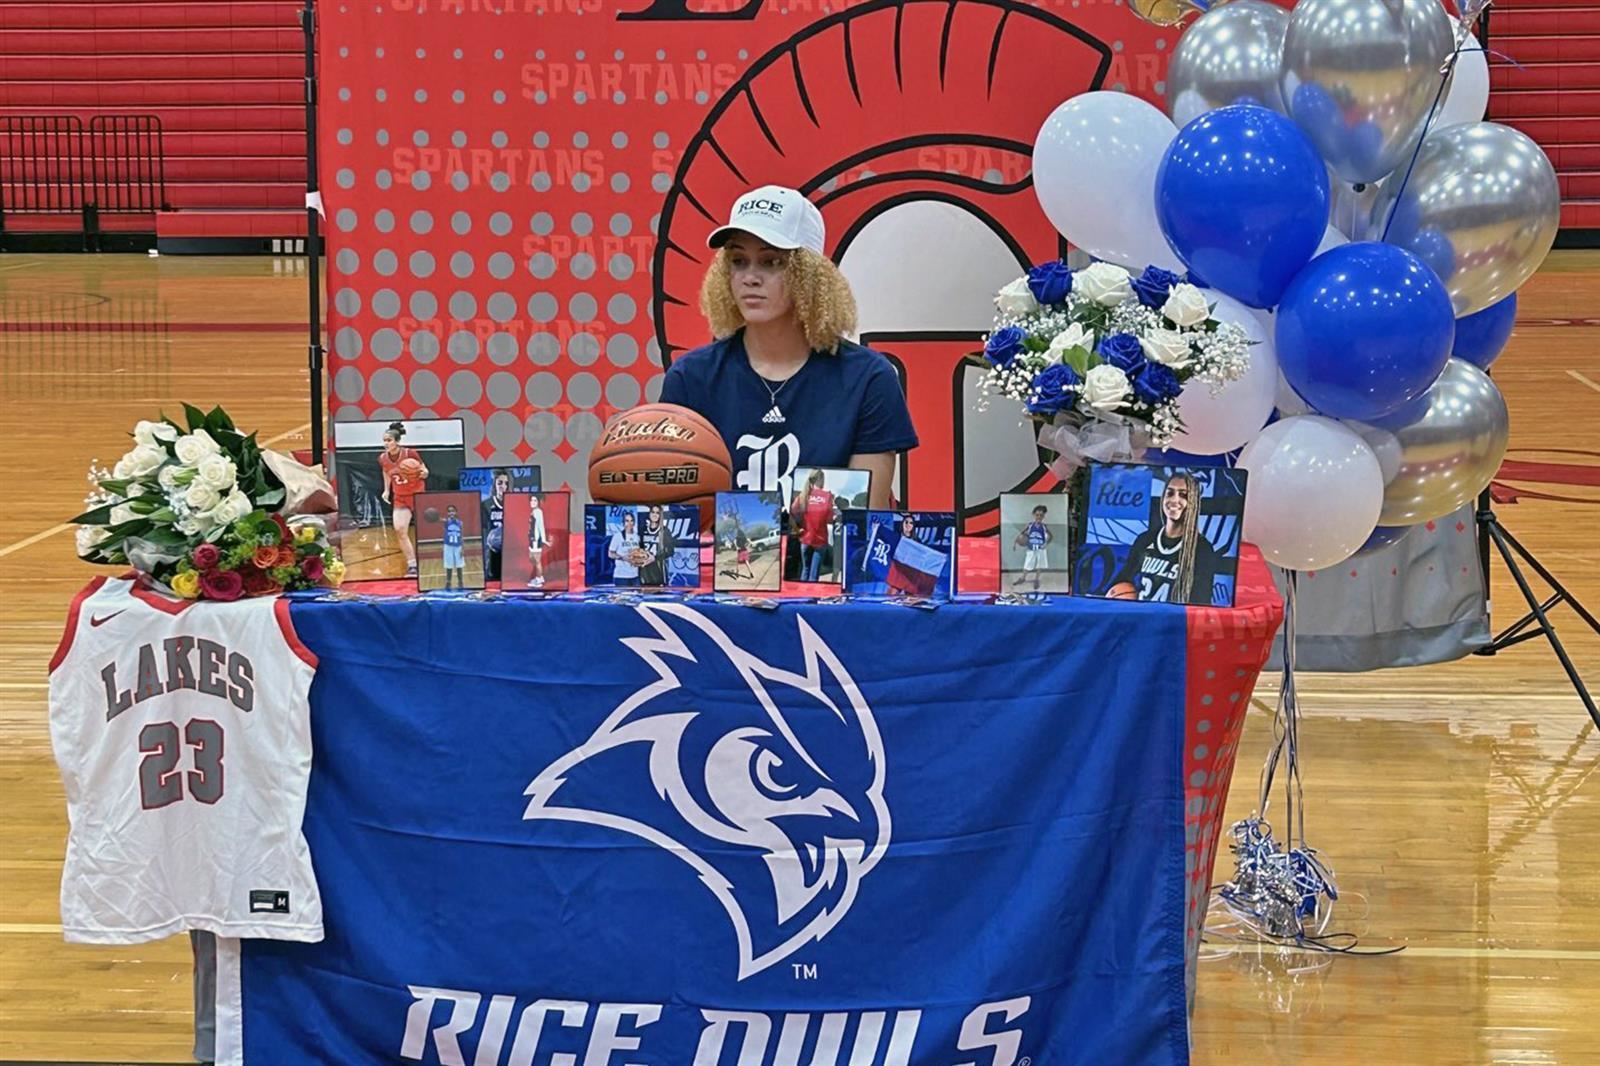 Cypress Lakes High School senior Aniah Alexis signed her letter of intent to play basketball at Rice University.